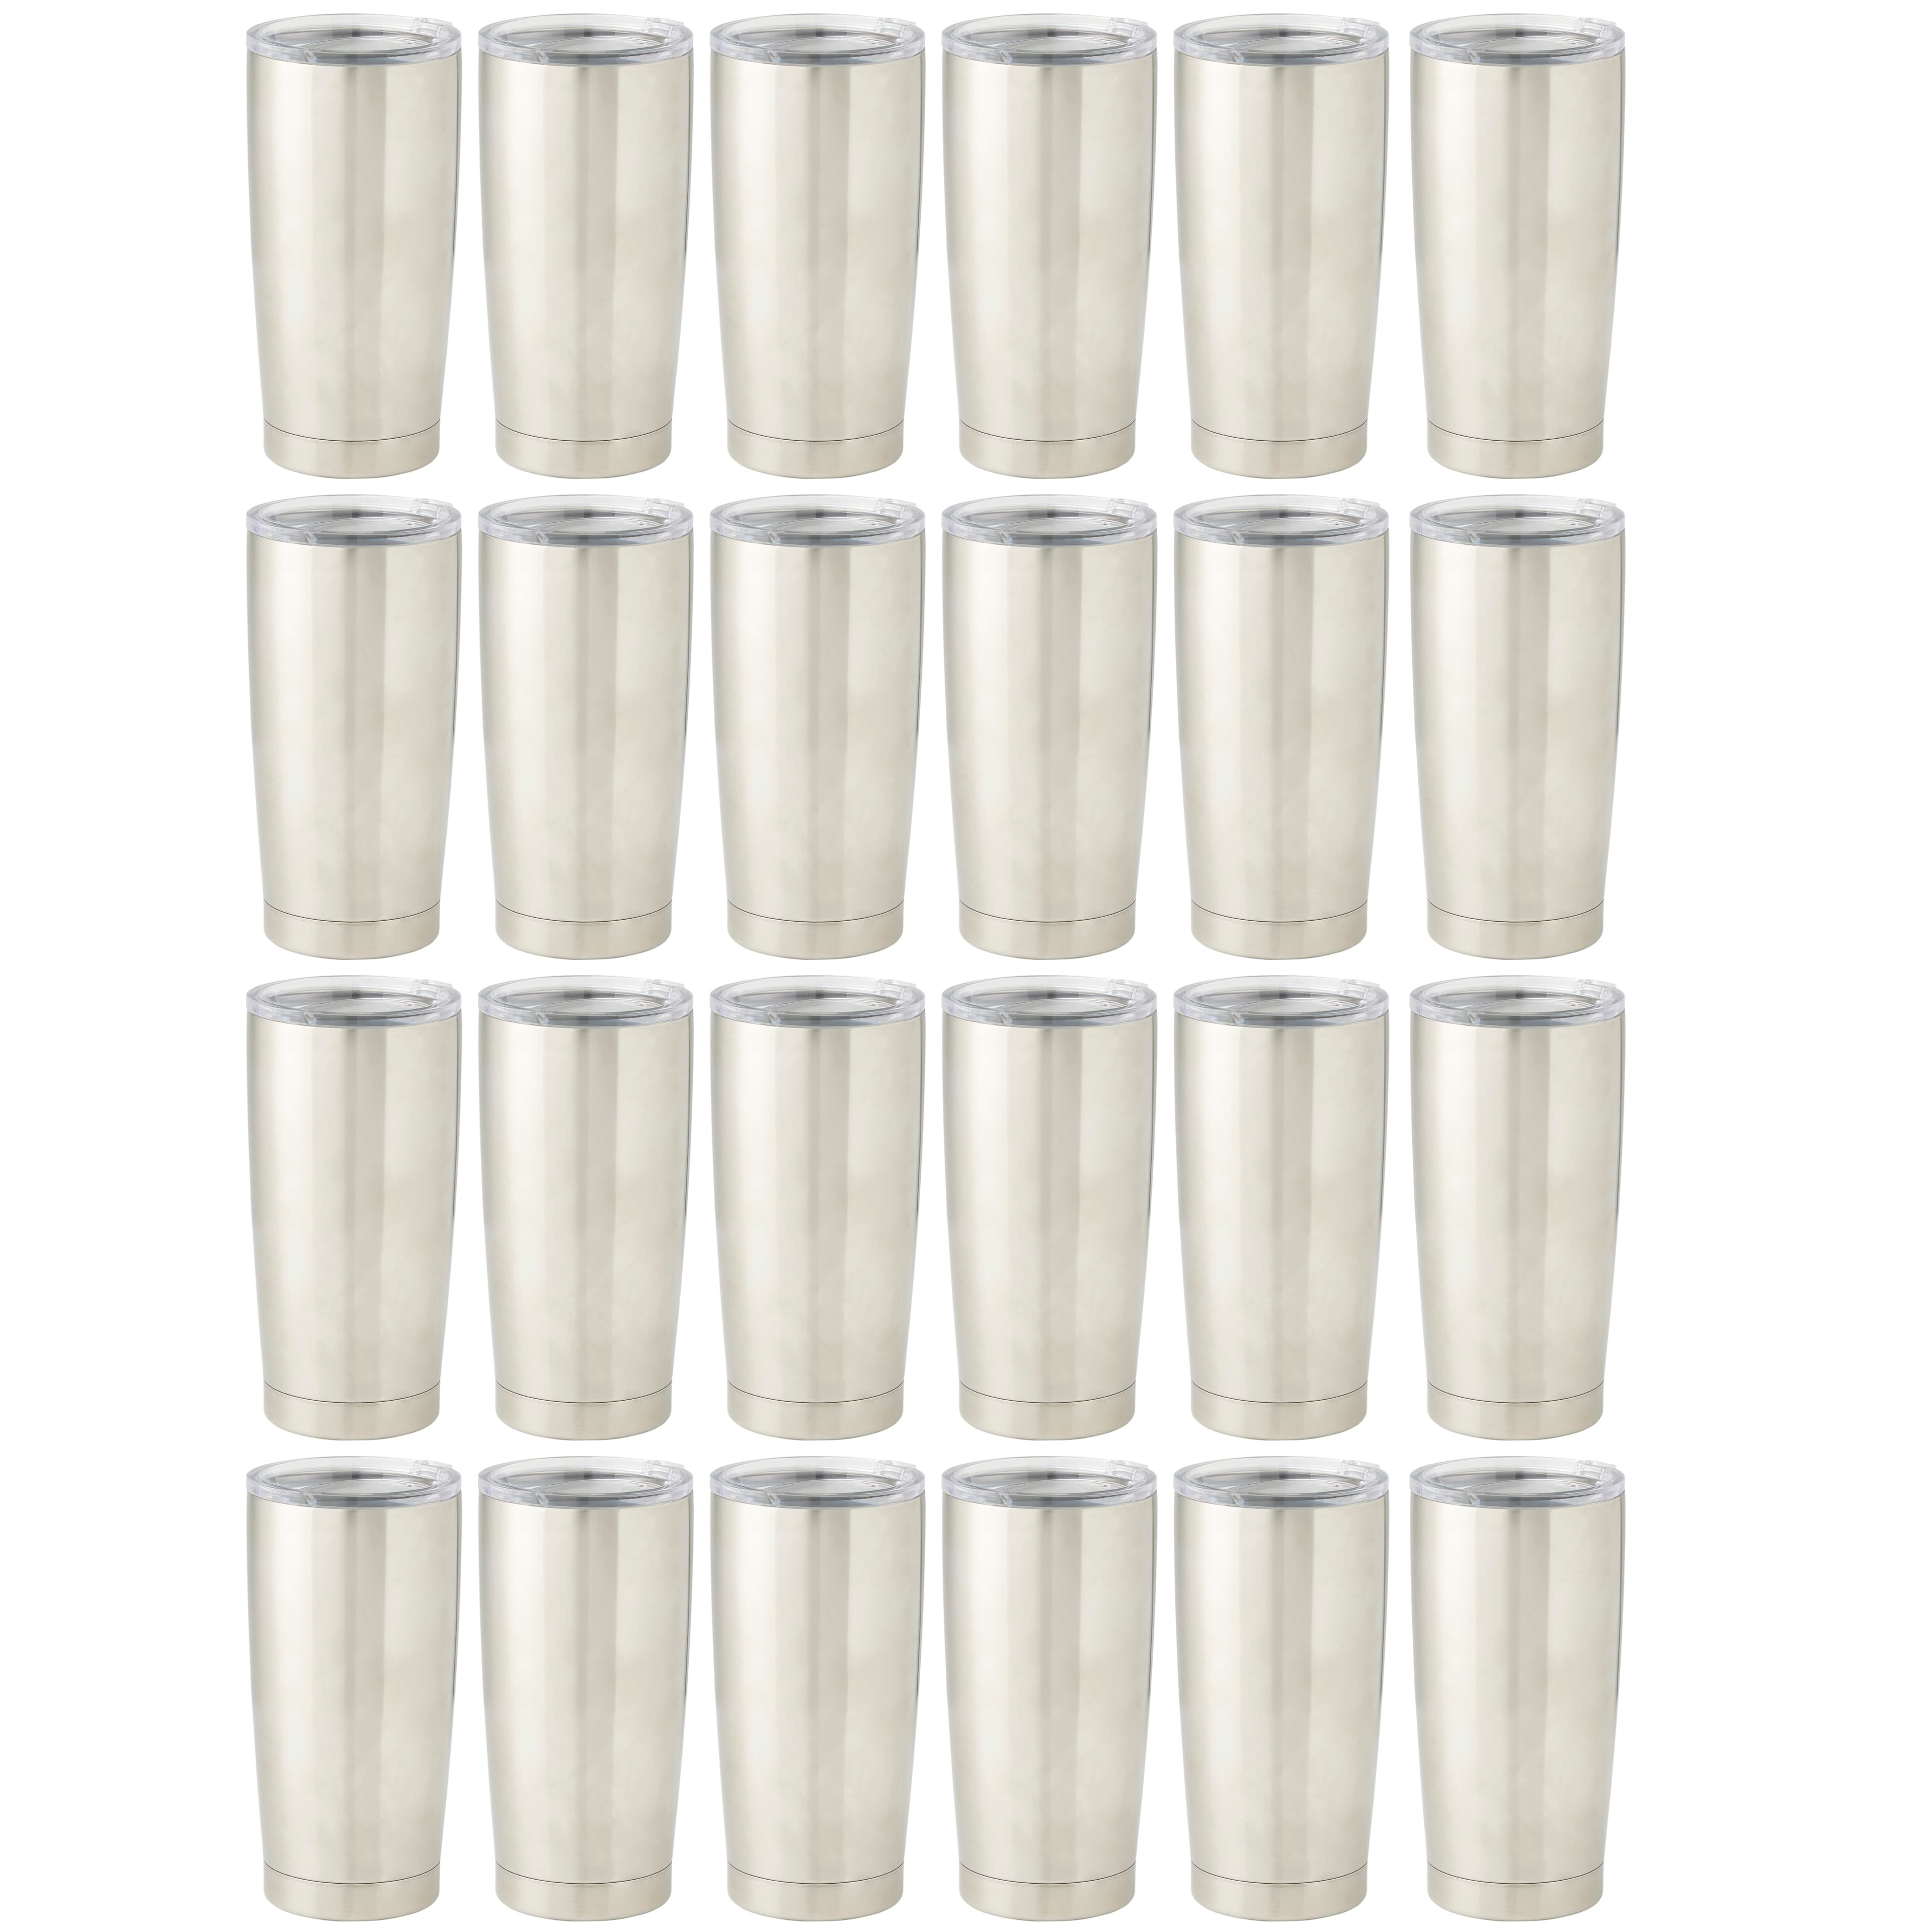 18.5oz. Black Stainless Steel Tumbler by Celebrate It